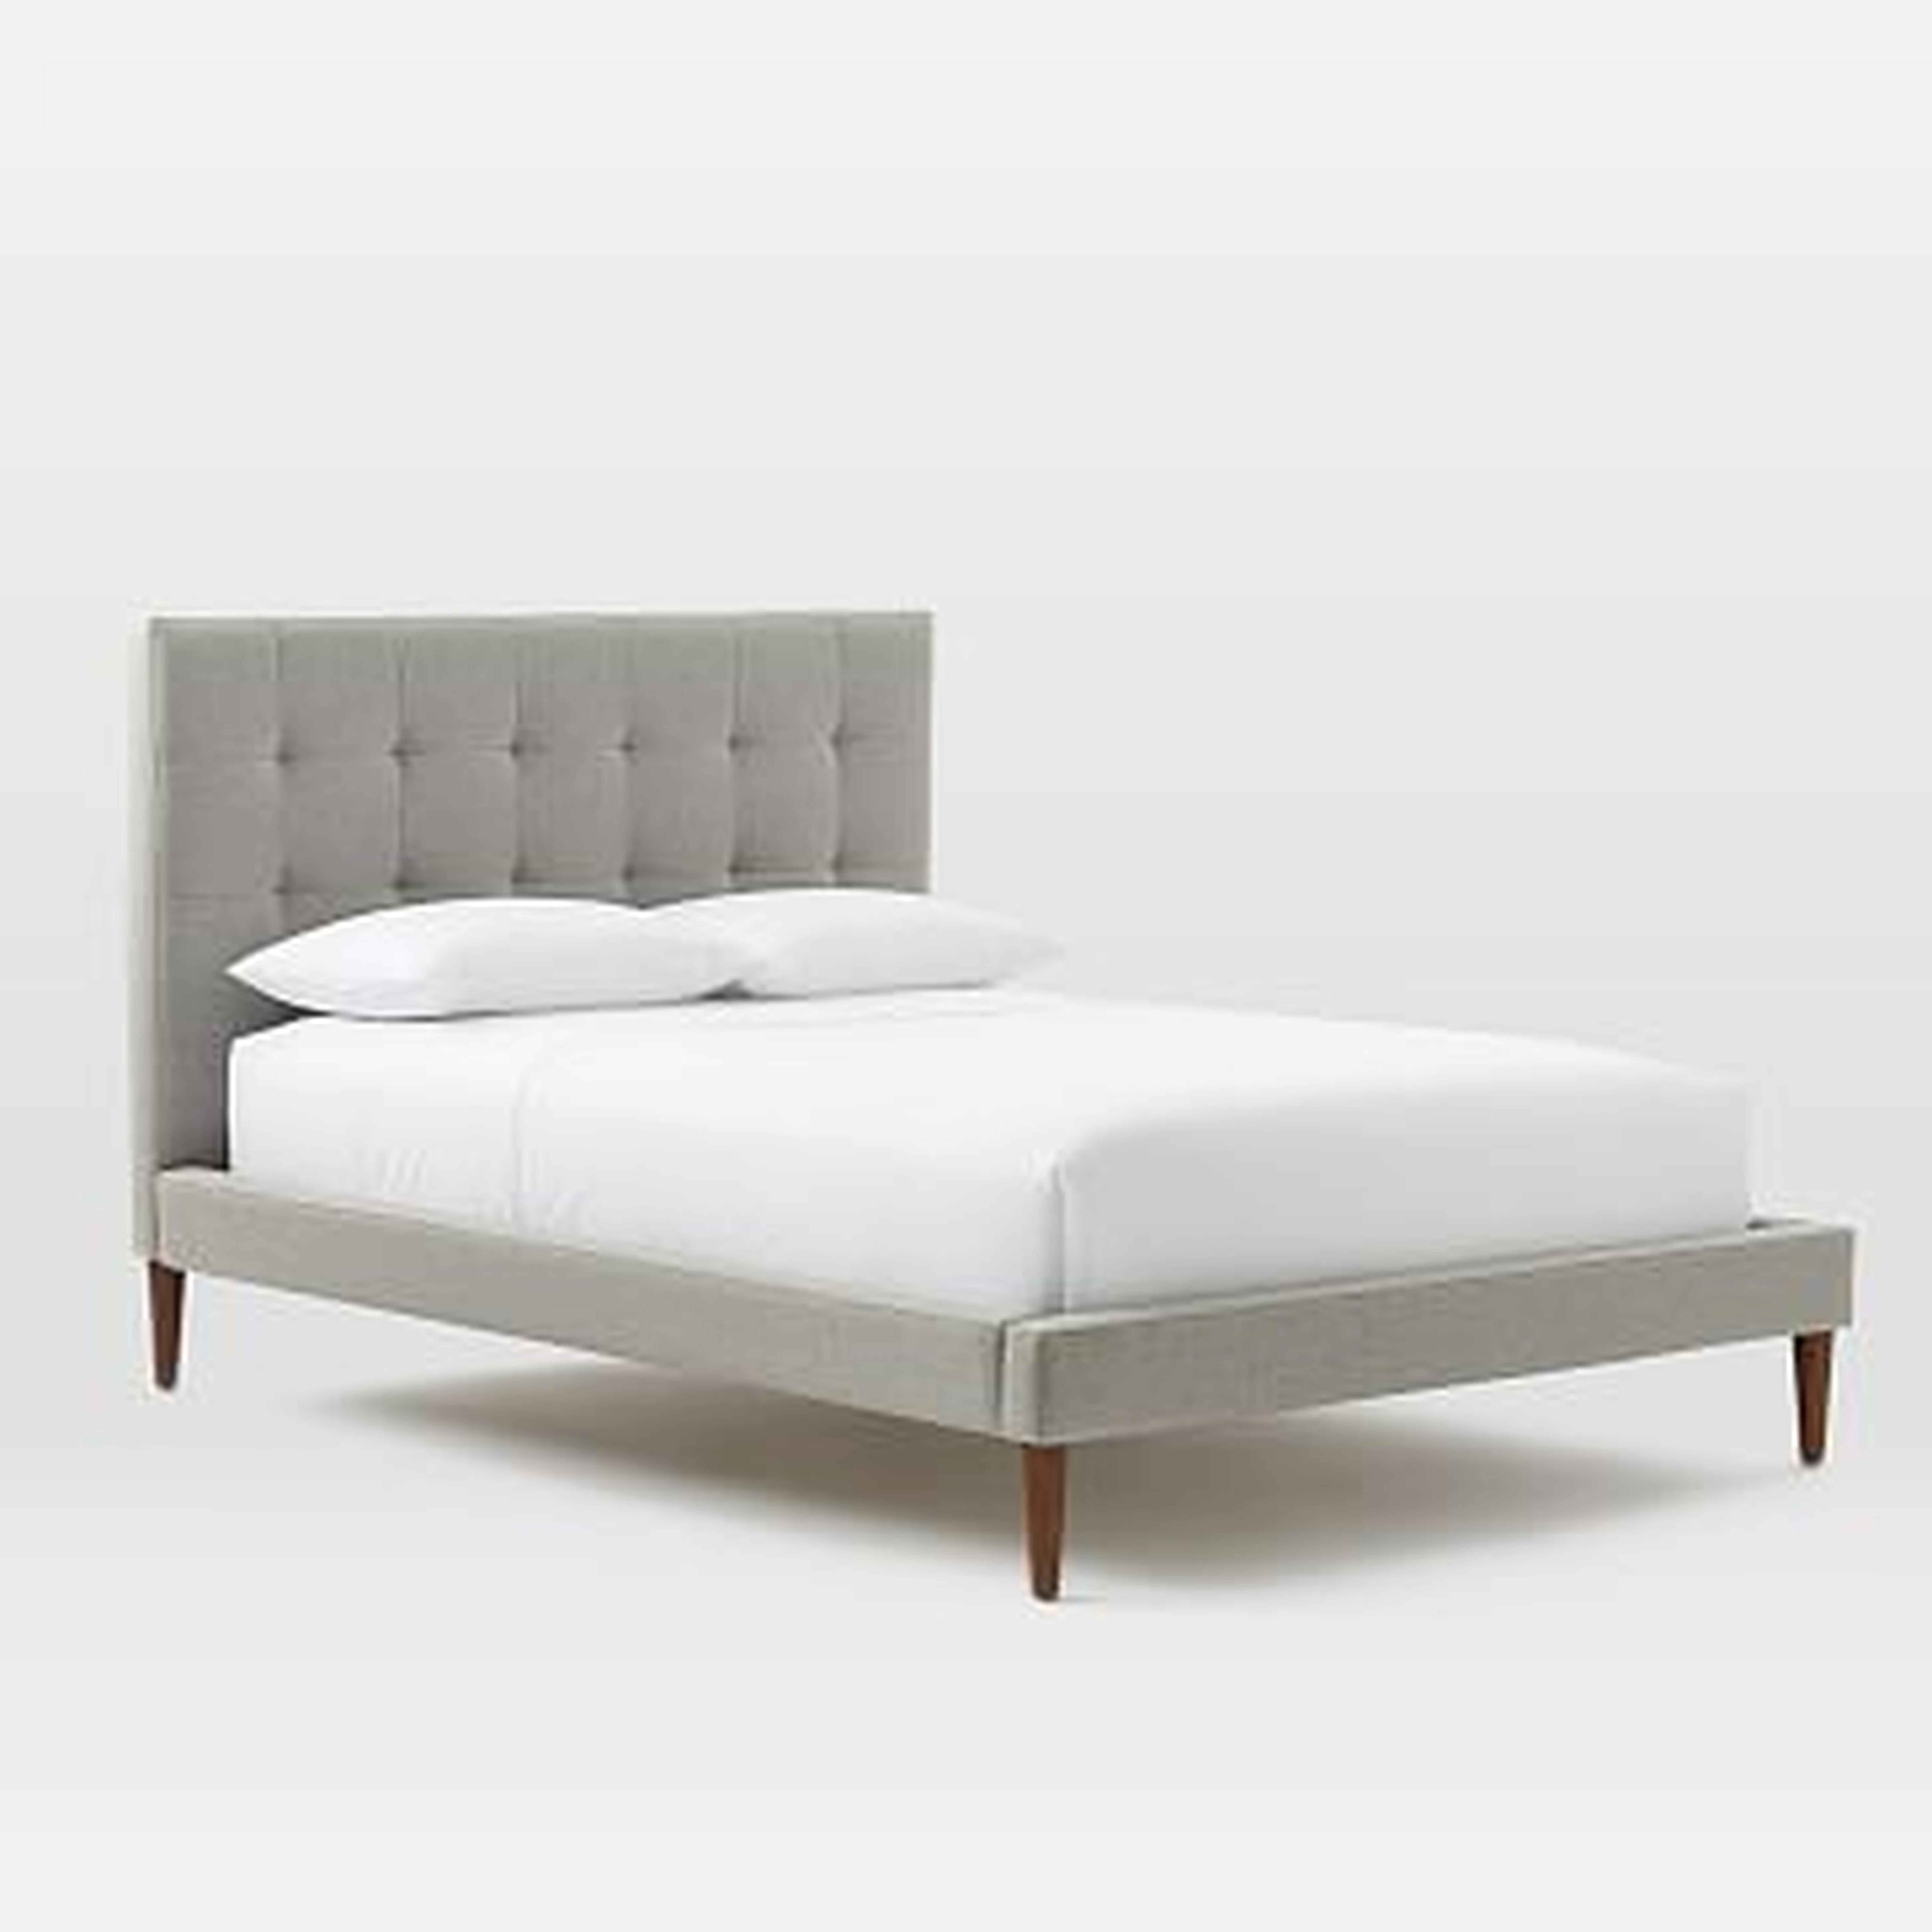 Grid Tufted Headboard + Tapered Leg - Low, Queen, Heathered Crosshatch, Feather Gray - West Elm